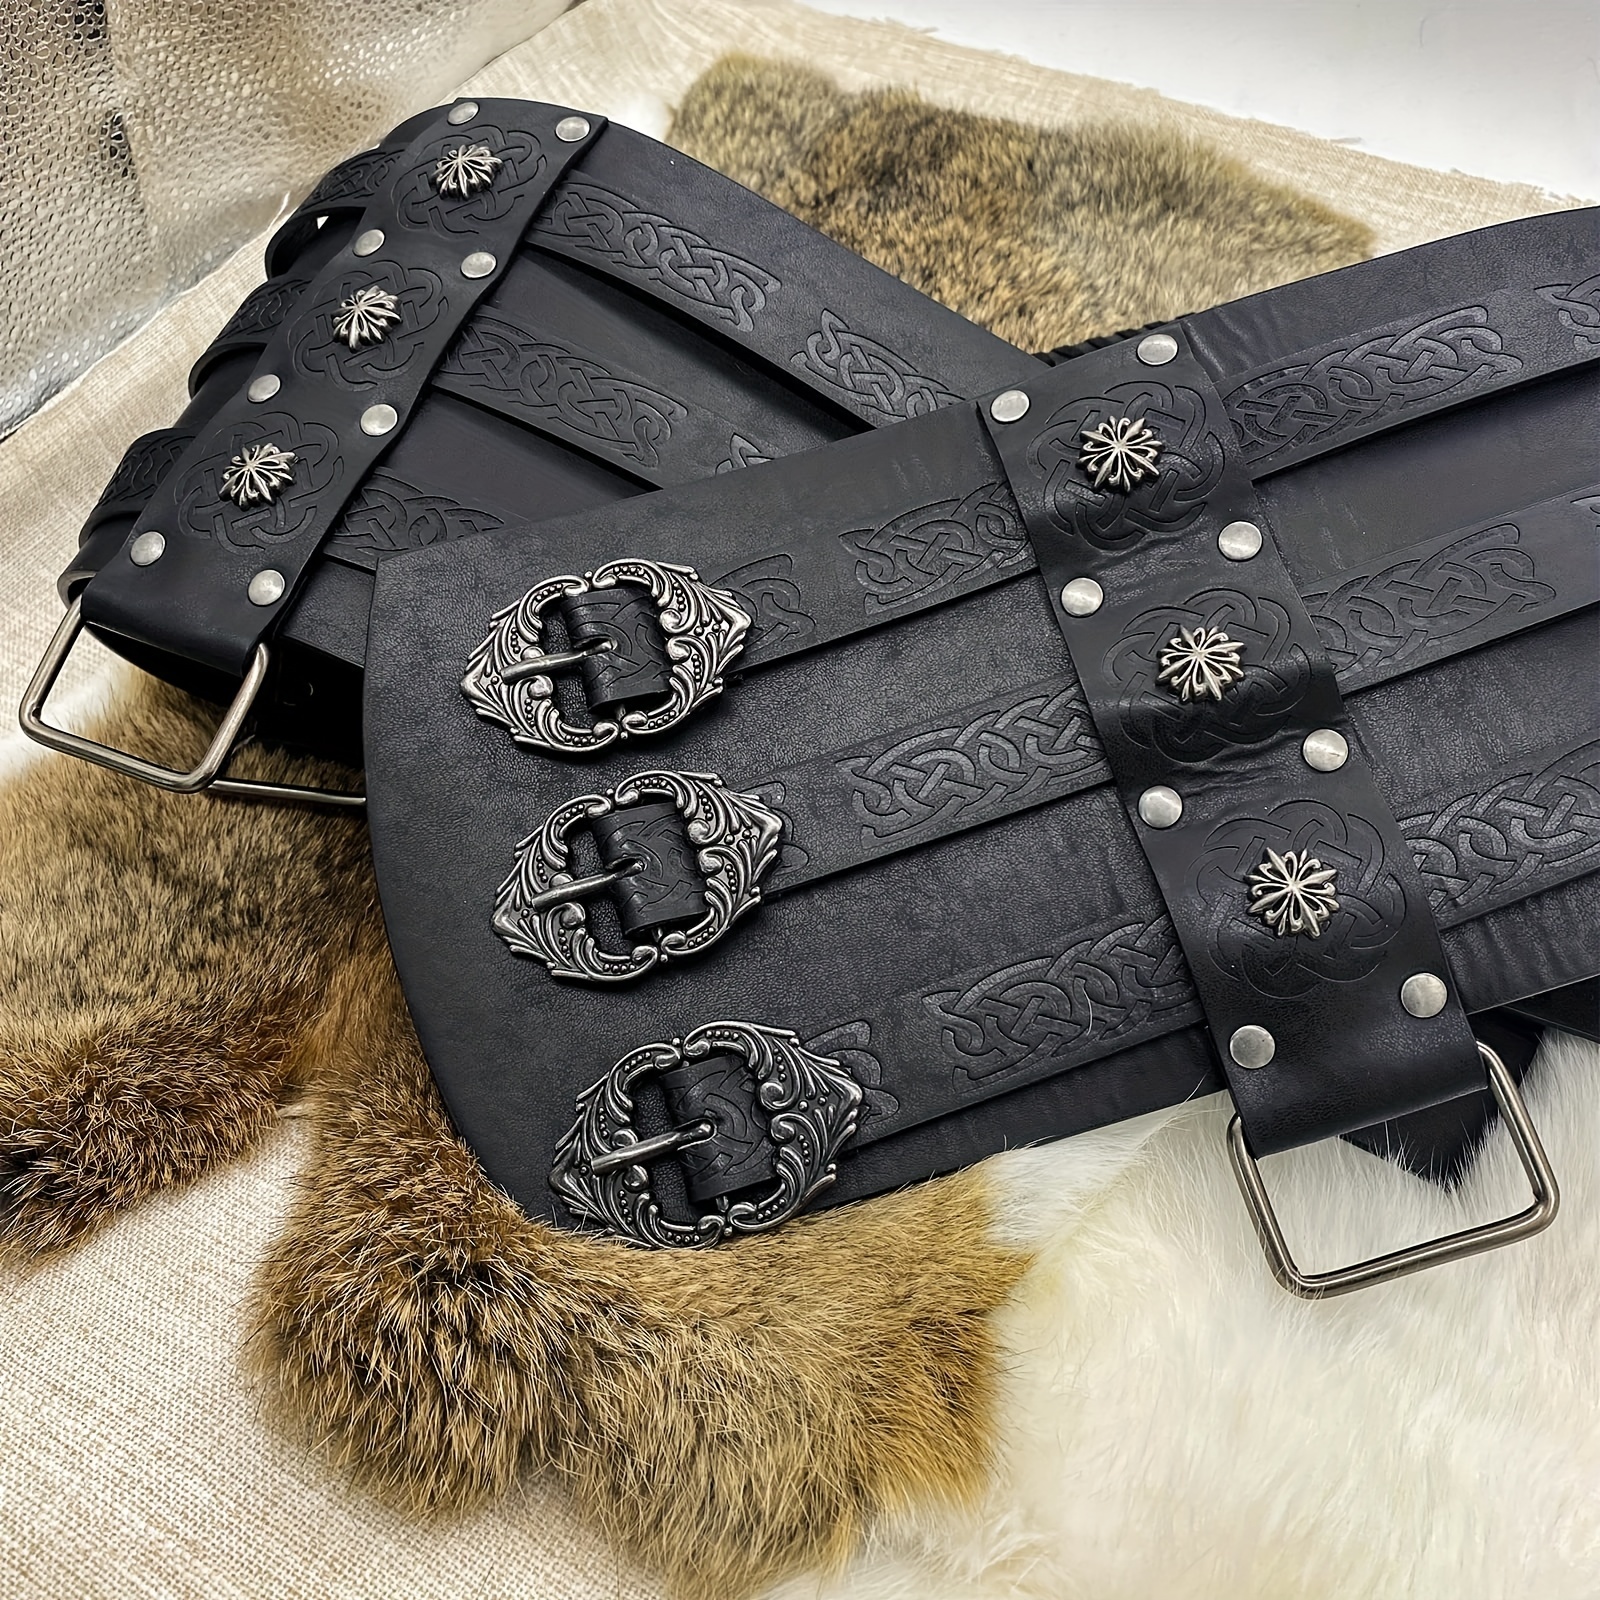 Leather Medieval Corset Underbust Belt Costumes, Medieval, Steampunk,  Festival-wear Chest-harness, for Cosplay and Larp, Vikings, Witches -   Canada